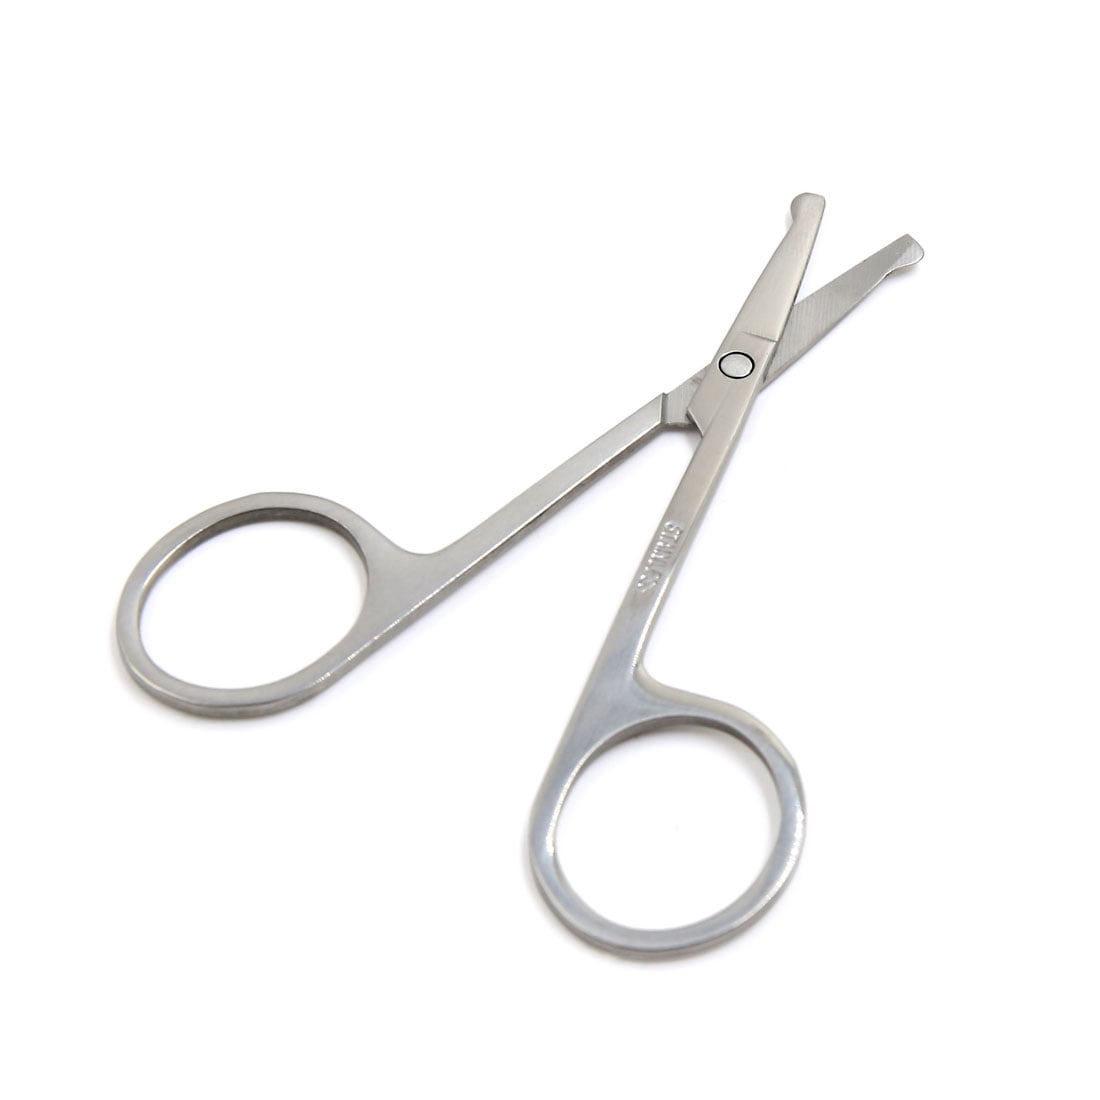 Unique Bargains Stainless Steel Eyebrow Eyelash Remover Trimmer Curved Edge  Scissor Cosmetic Tool Silver Tone 1 Pcs